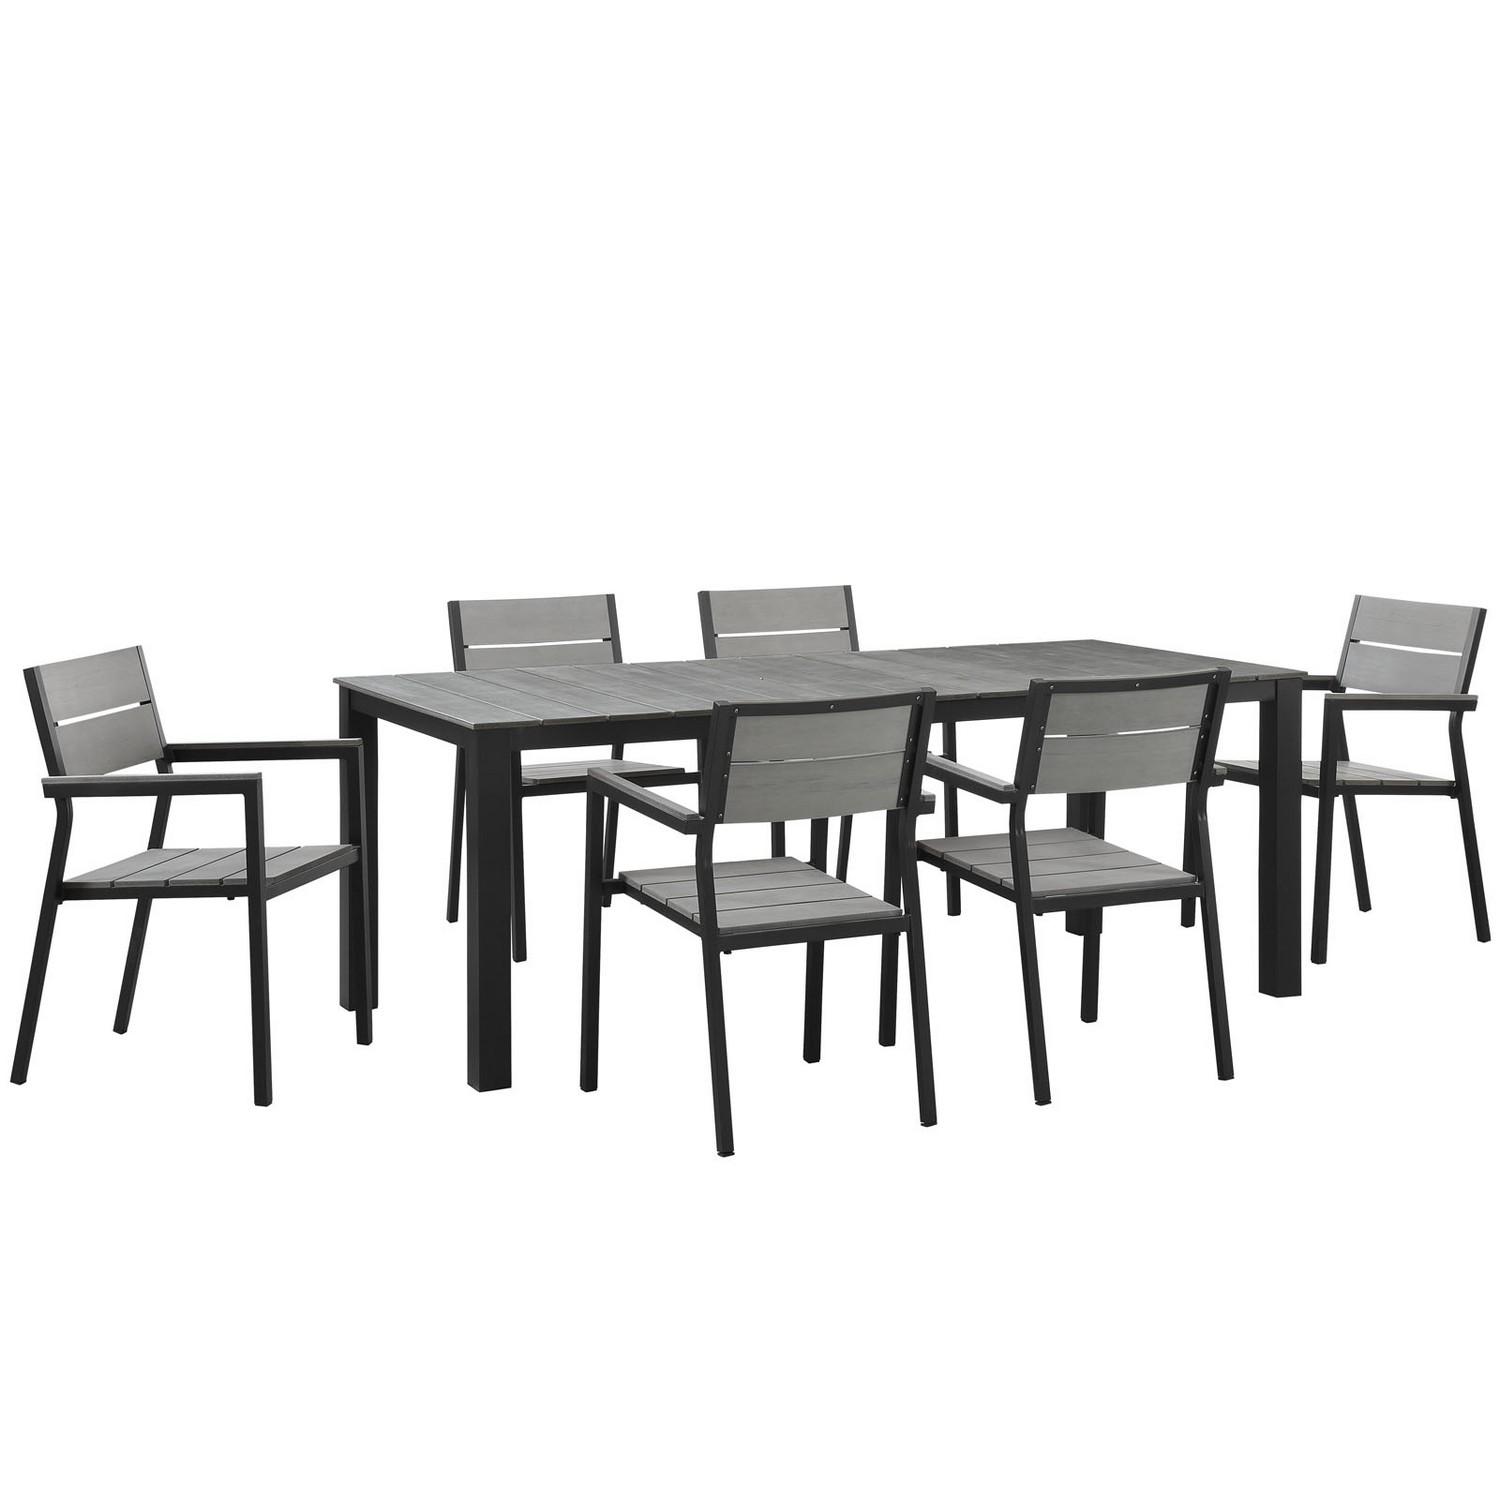 Modway Maine 7 Piece Outdoor Patio Dining Set - Brown/Gray